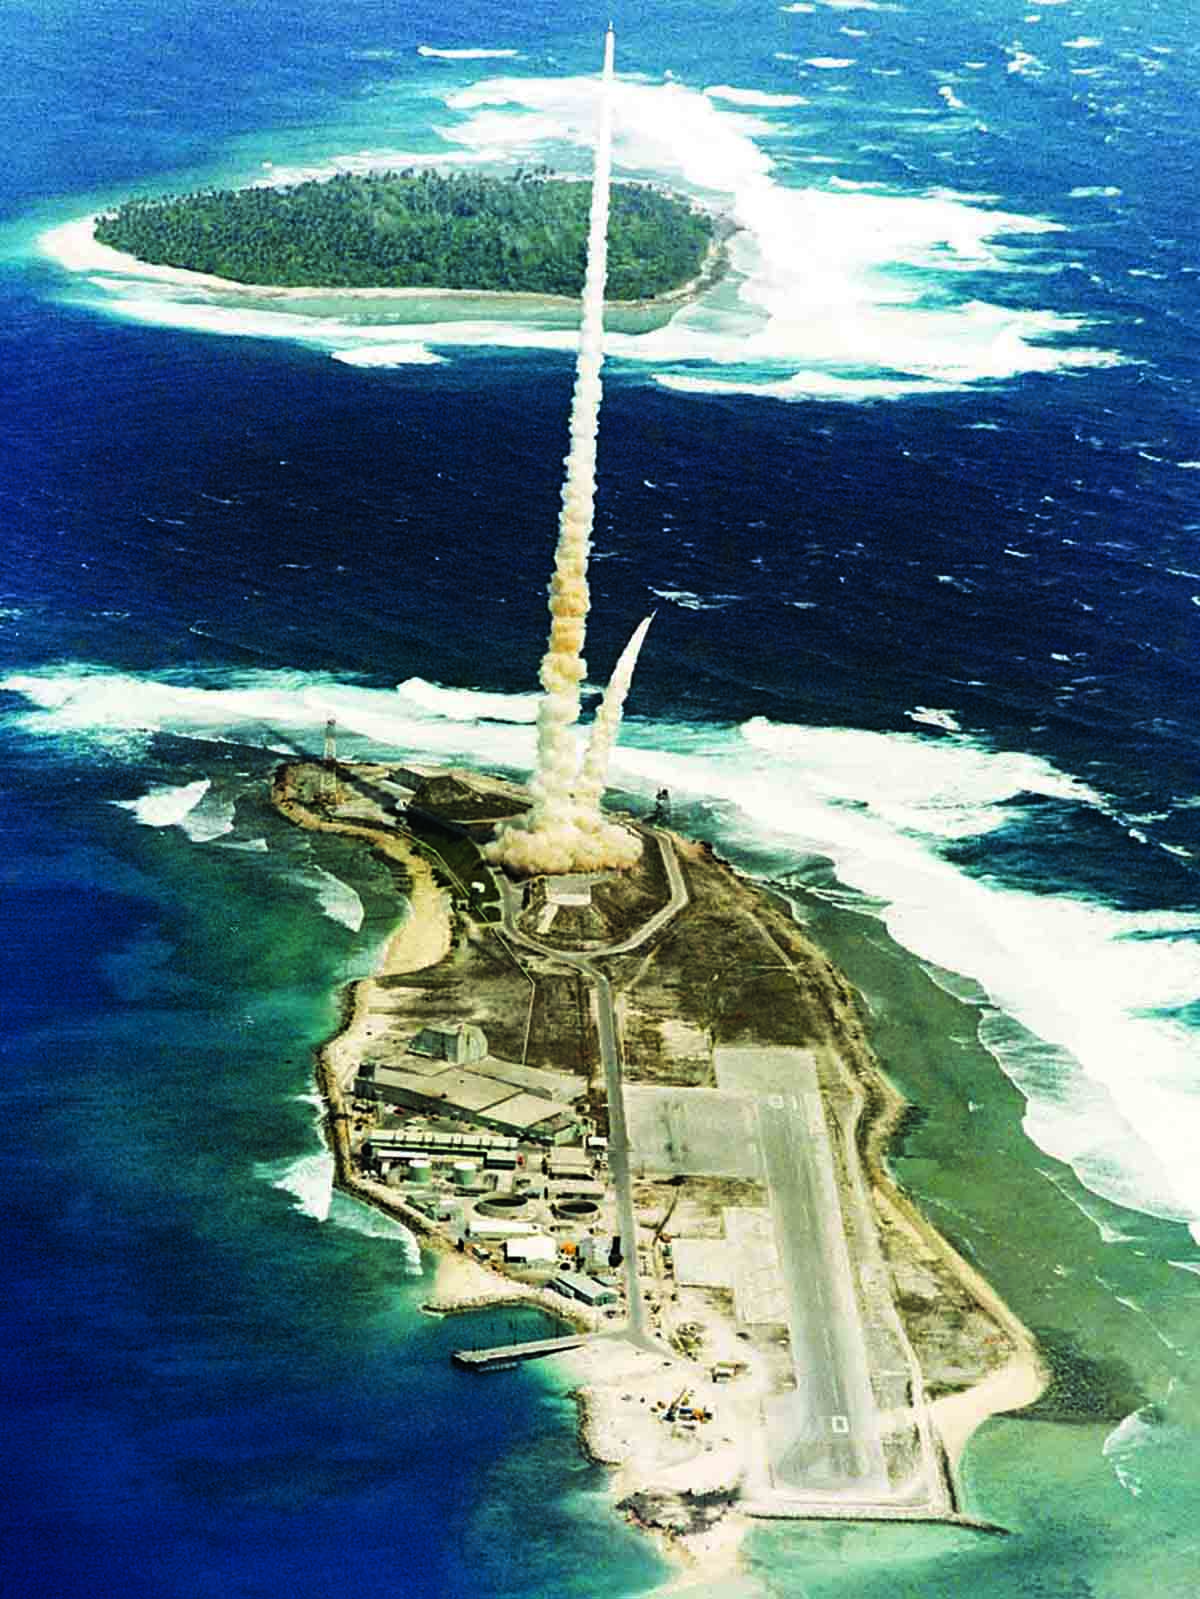 a missile test launch